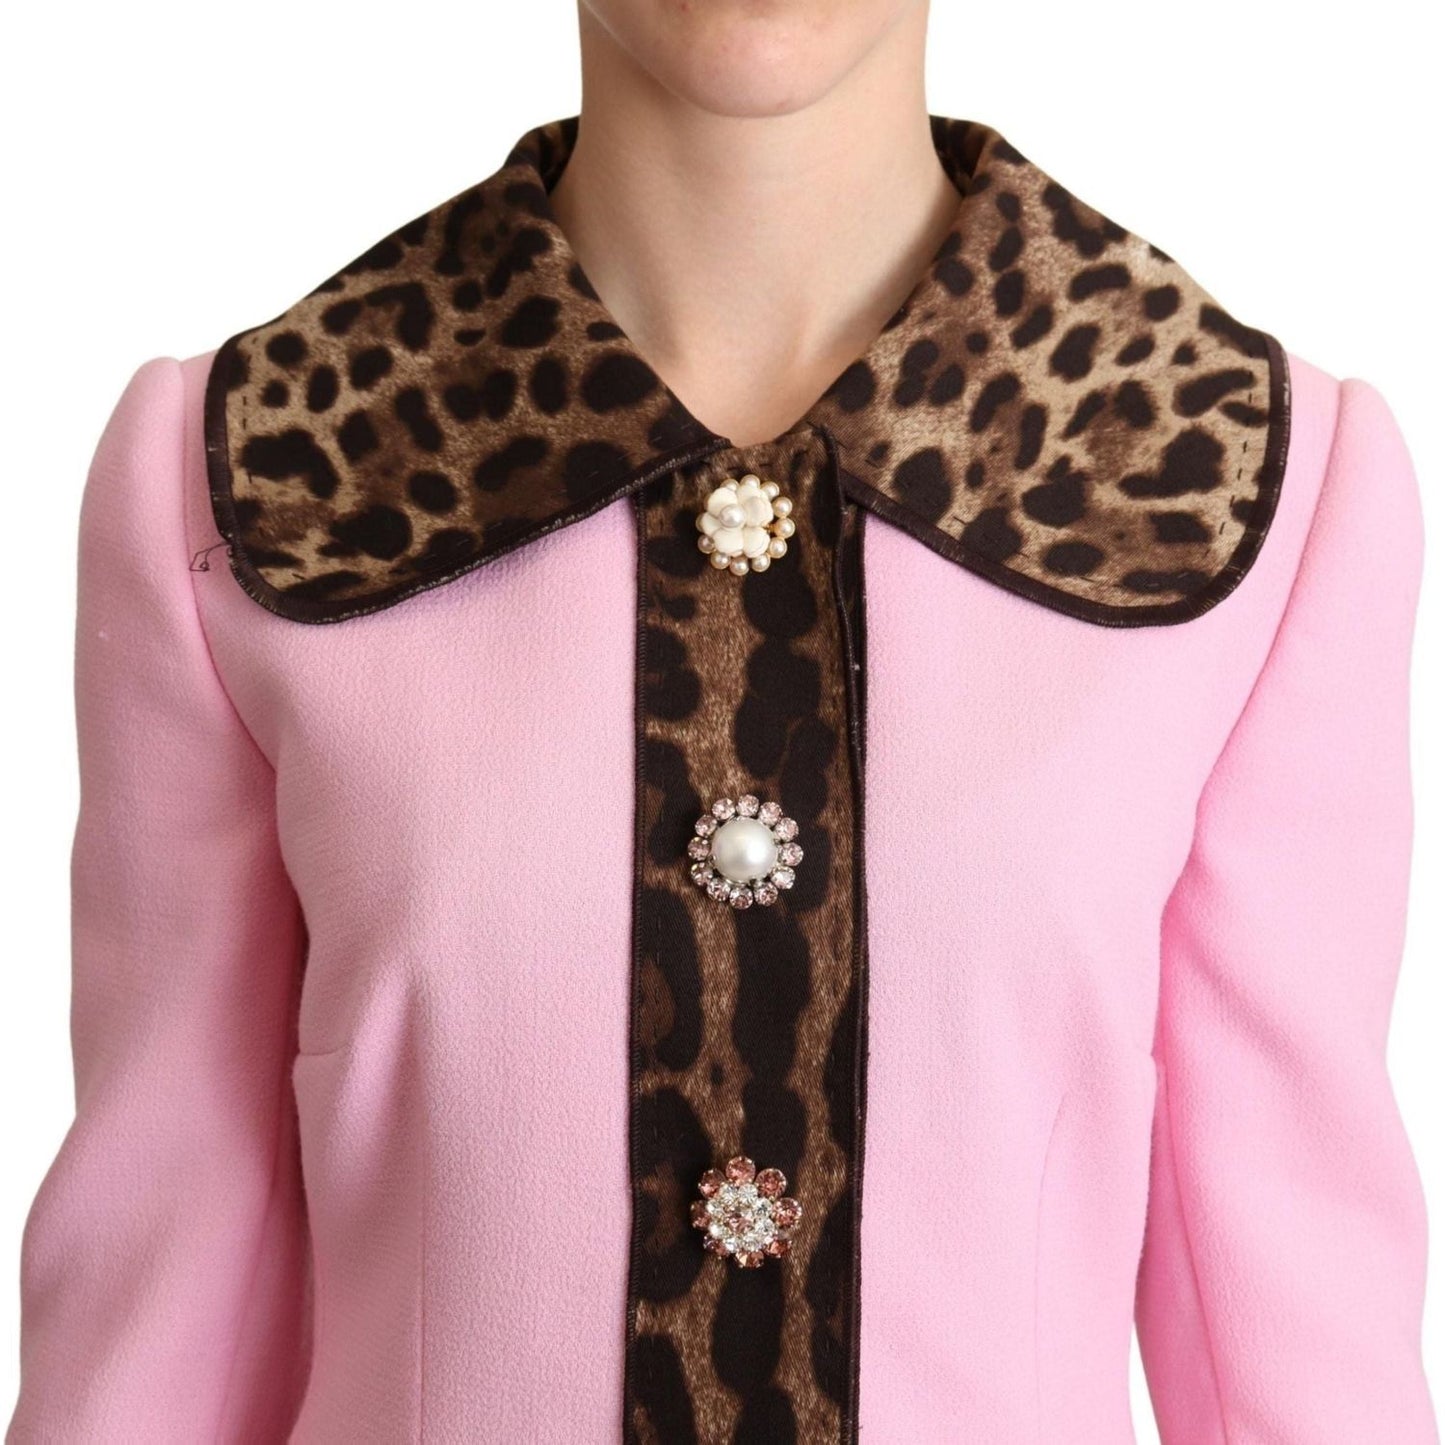 Dolce & Gabbana Chic Pink Leopard Trench with Crystal Buttons pink-leopard-wool-trenchcoat-jacket IMG_0117-scaled-da4ca24c-a10.jpg